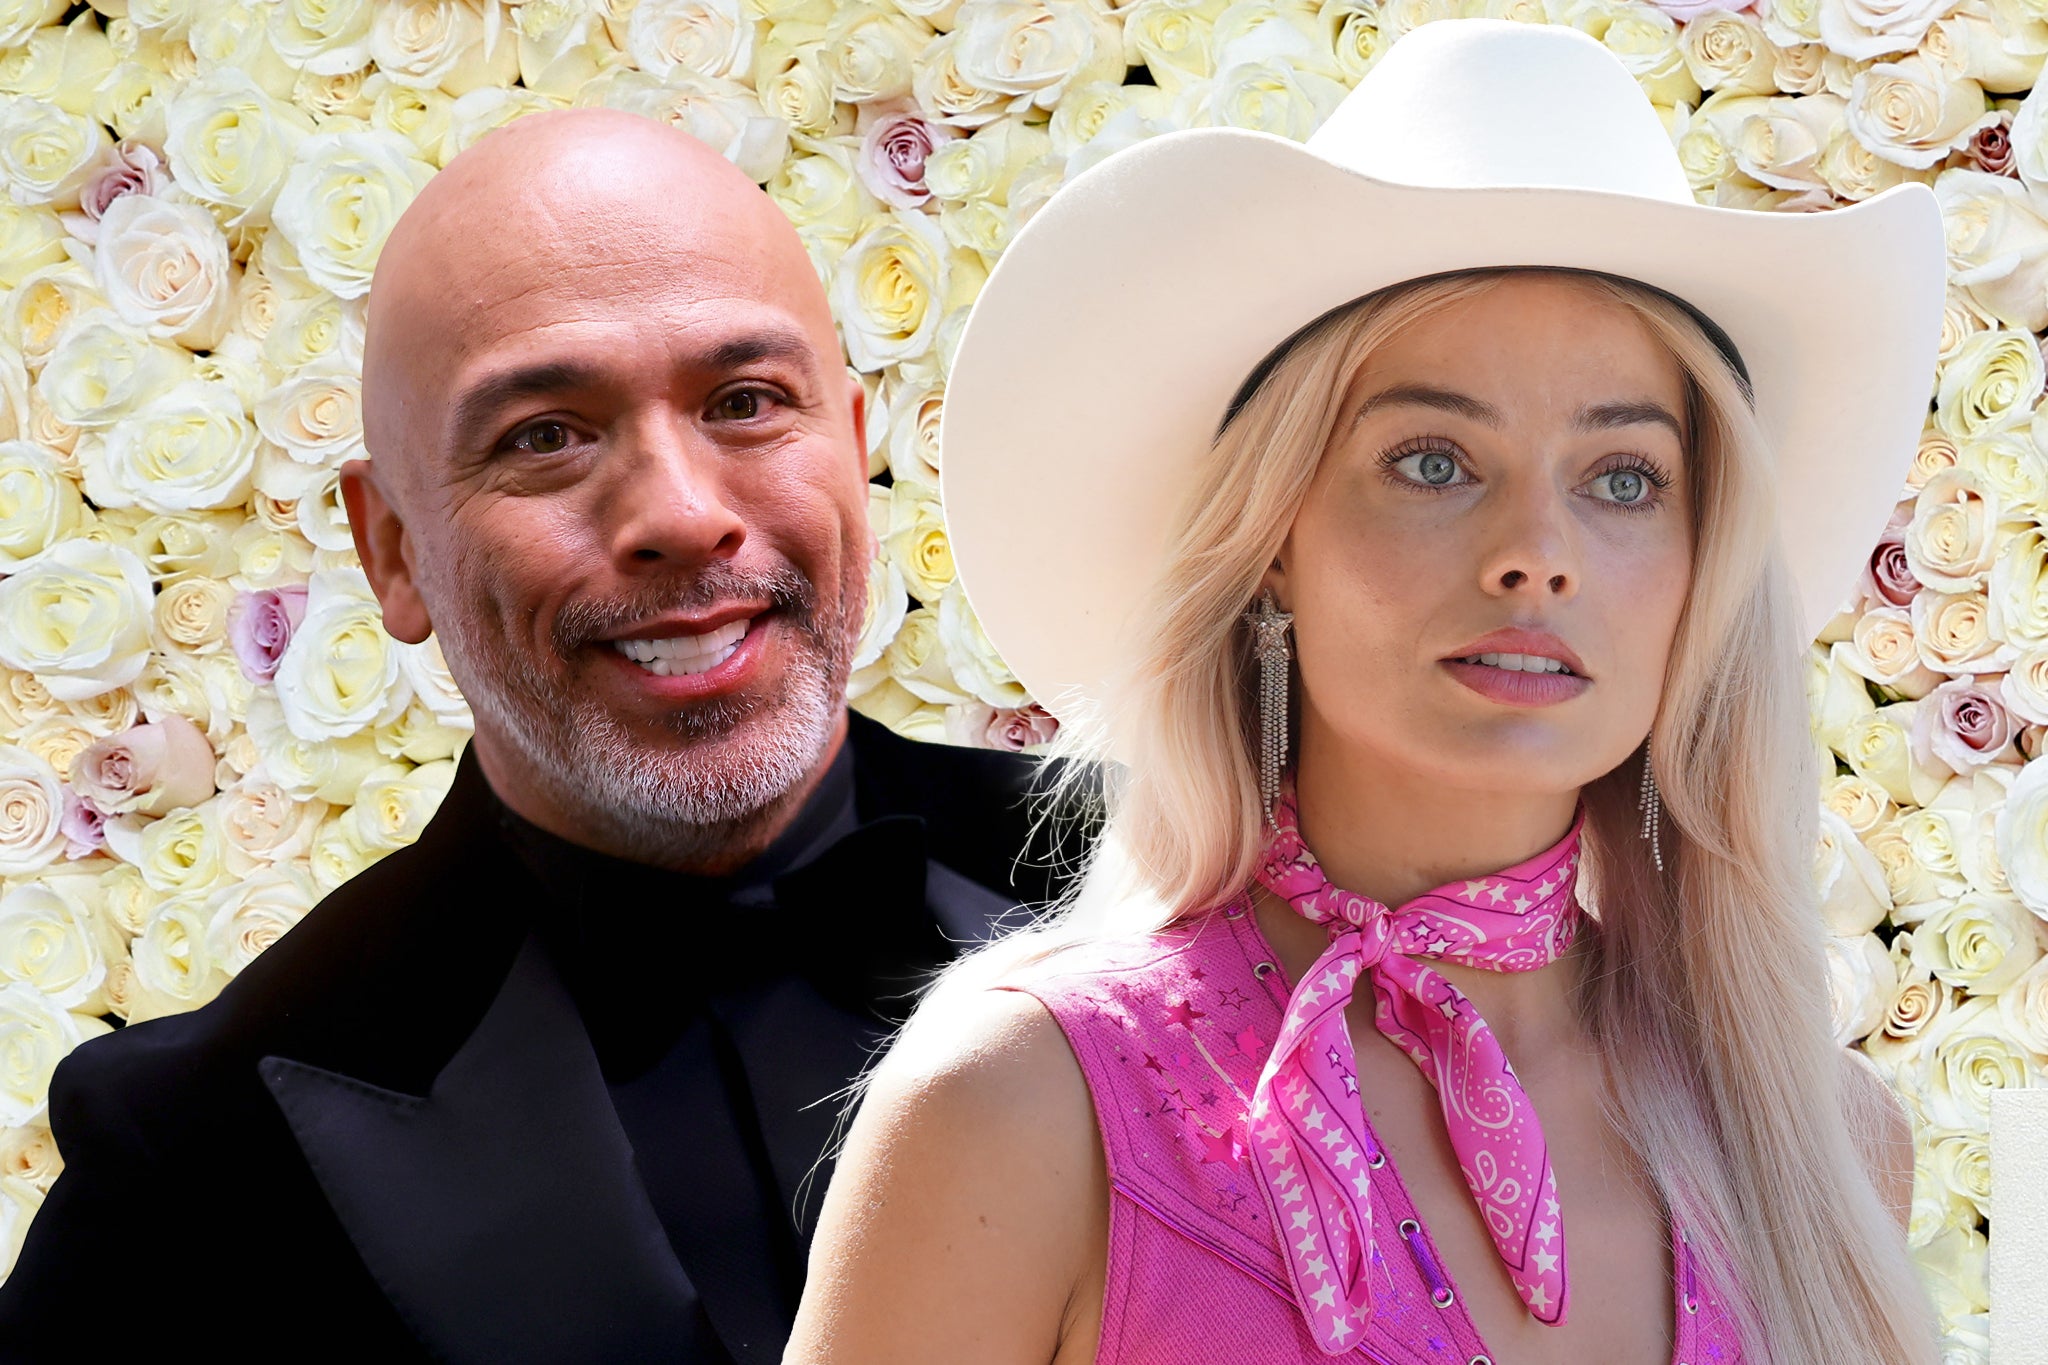 Jo Koy, whose opening monologue bombed at the Golden Globes, and Margot Robbie in the largely snubbed ‘Barbie’